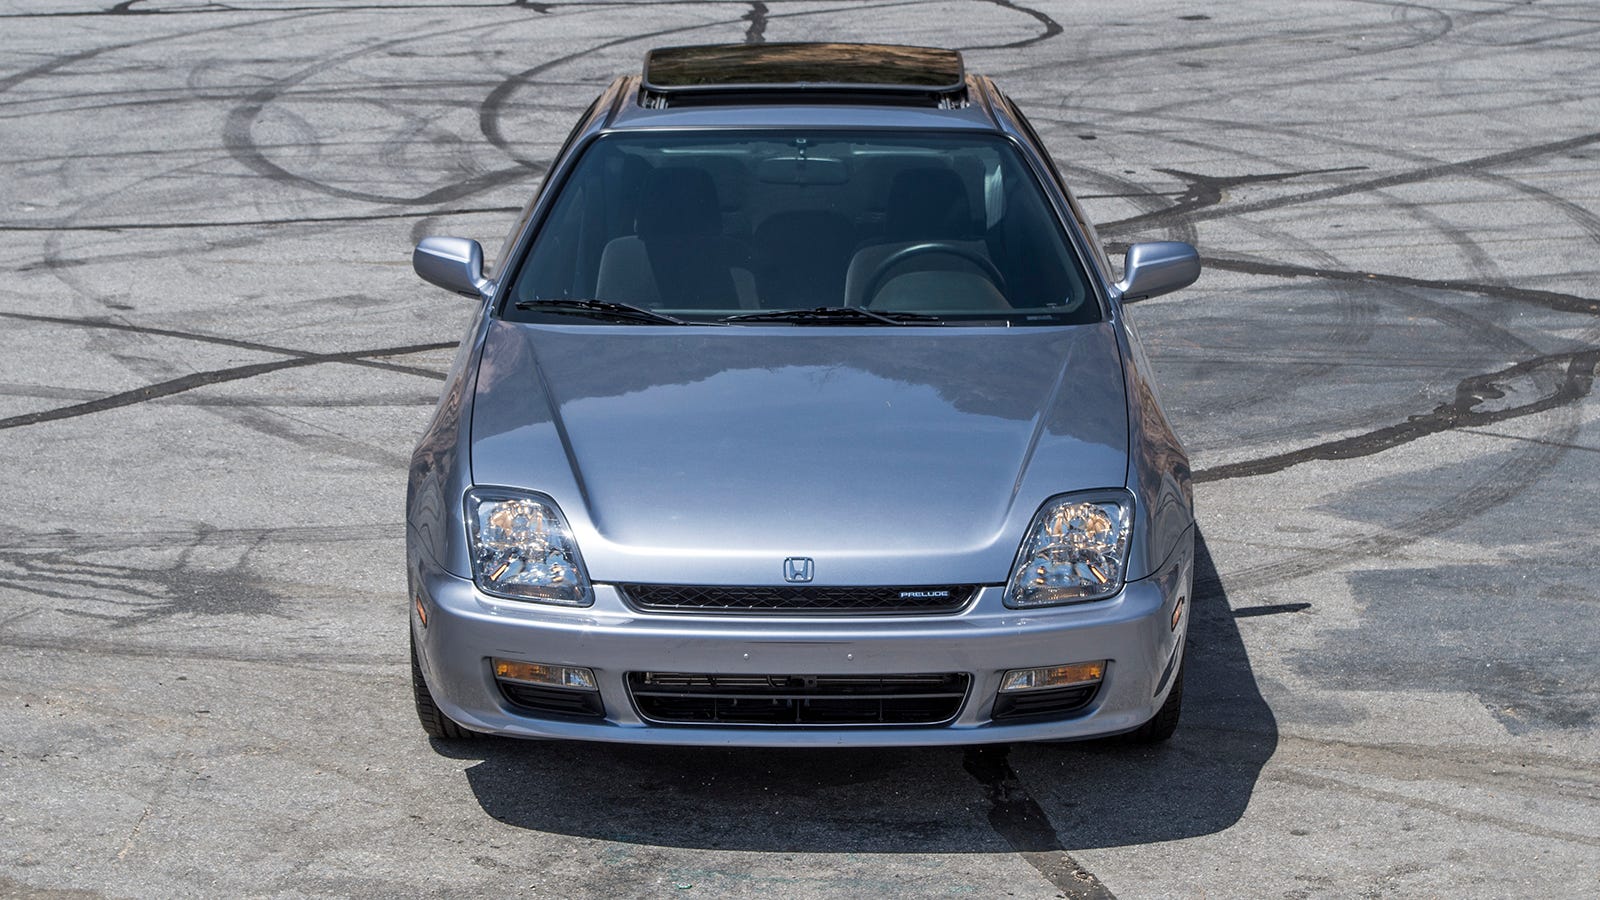 Driving A 1999 Honda Prelude Will Make You Miss Honest Cars